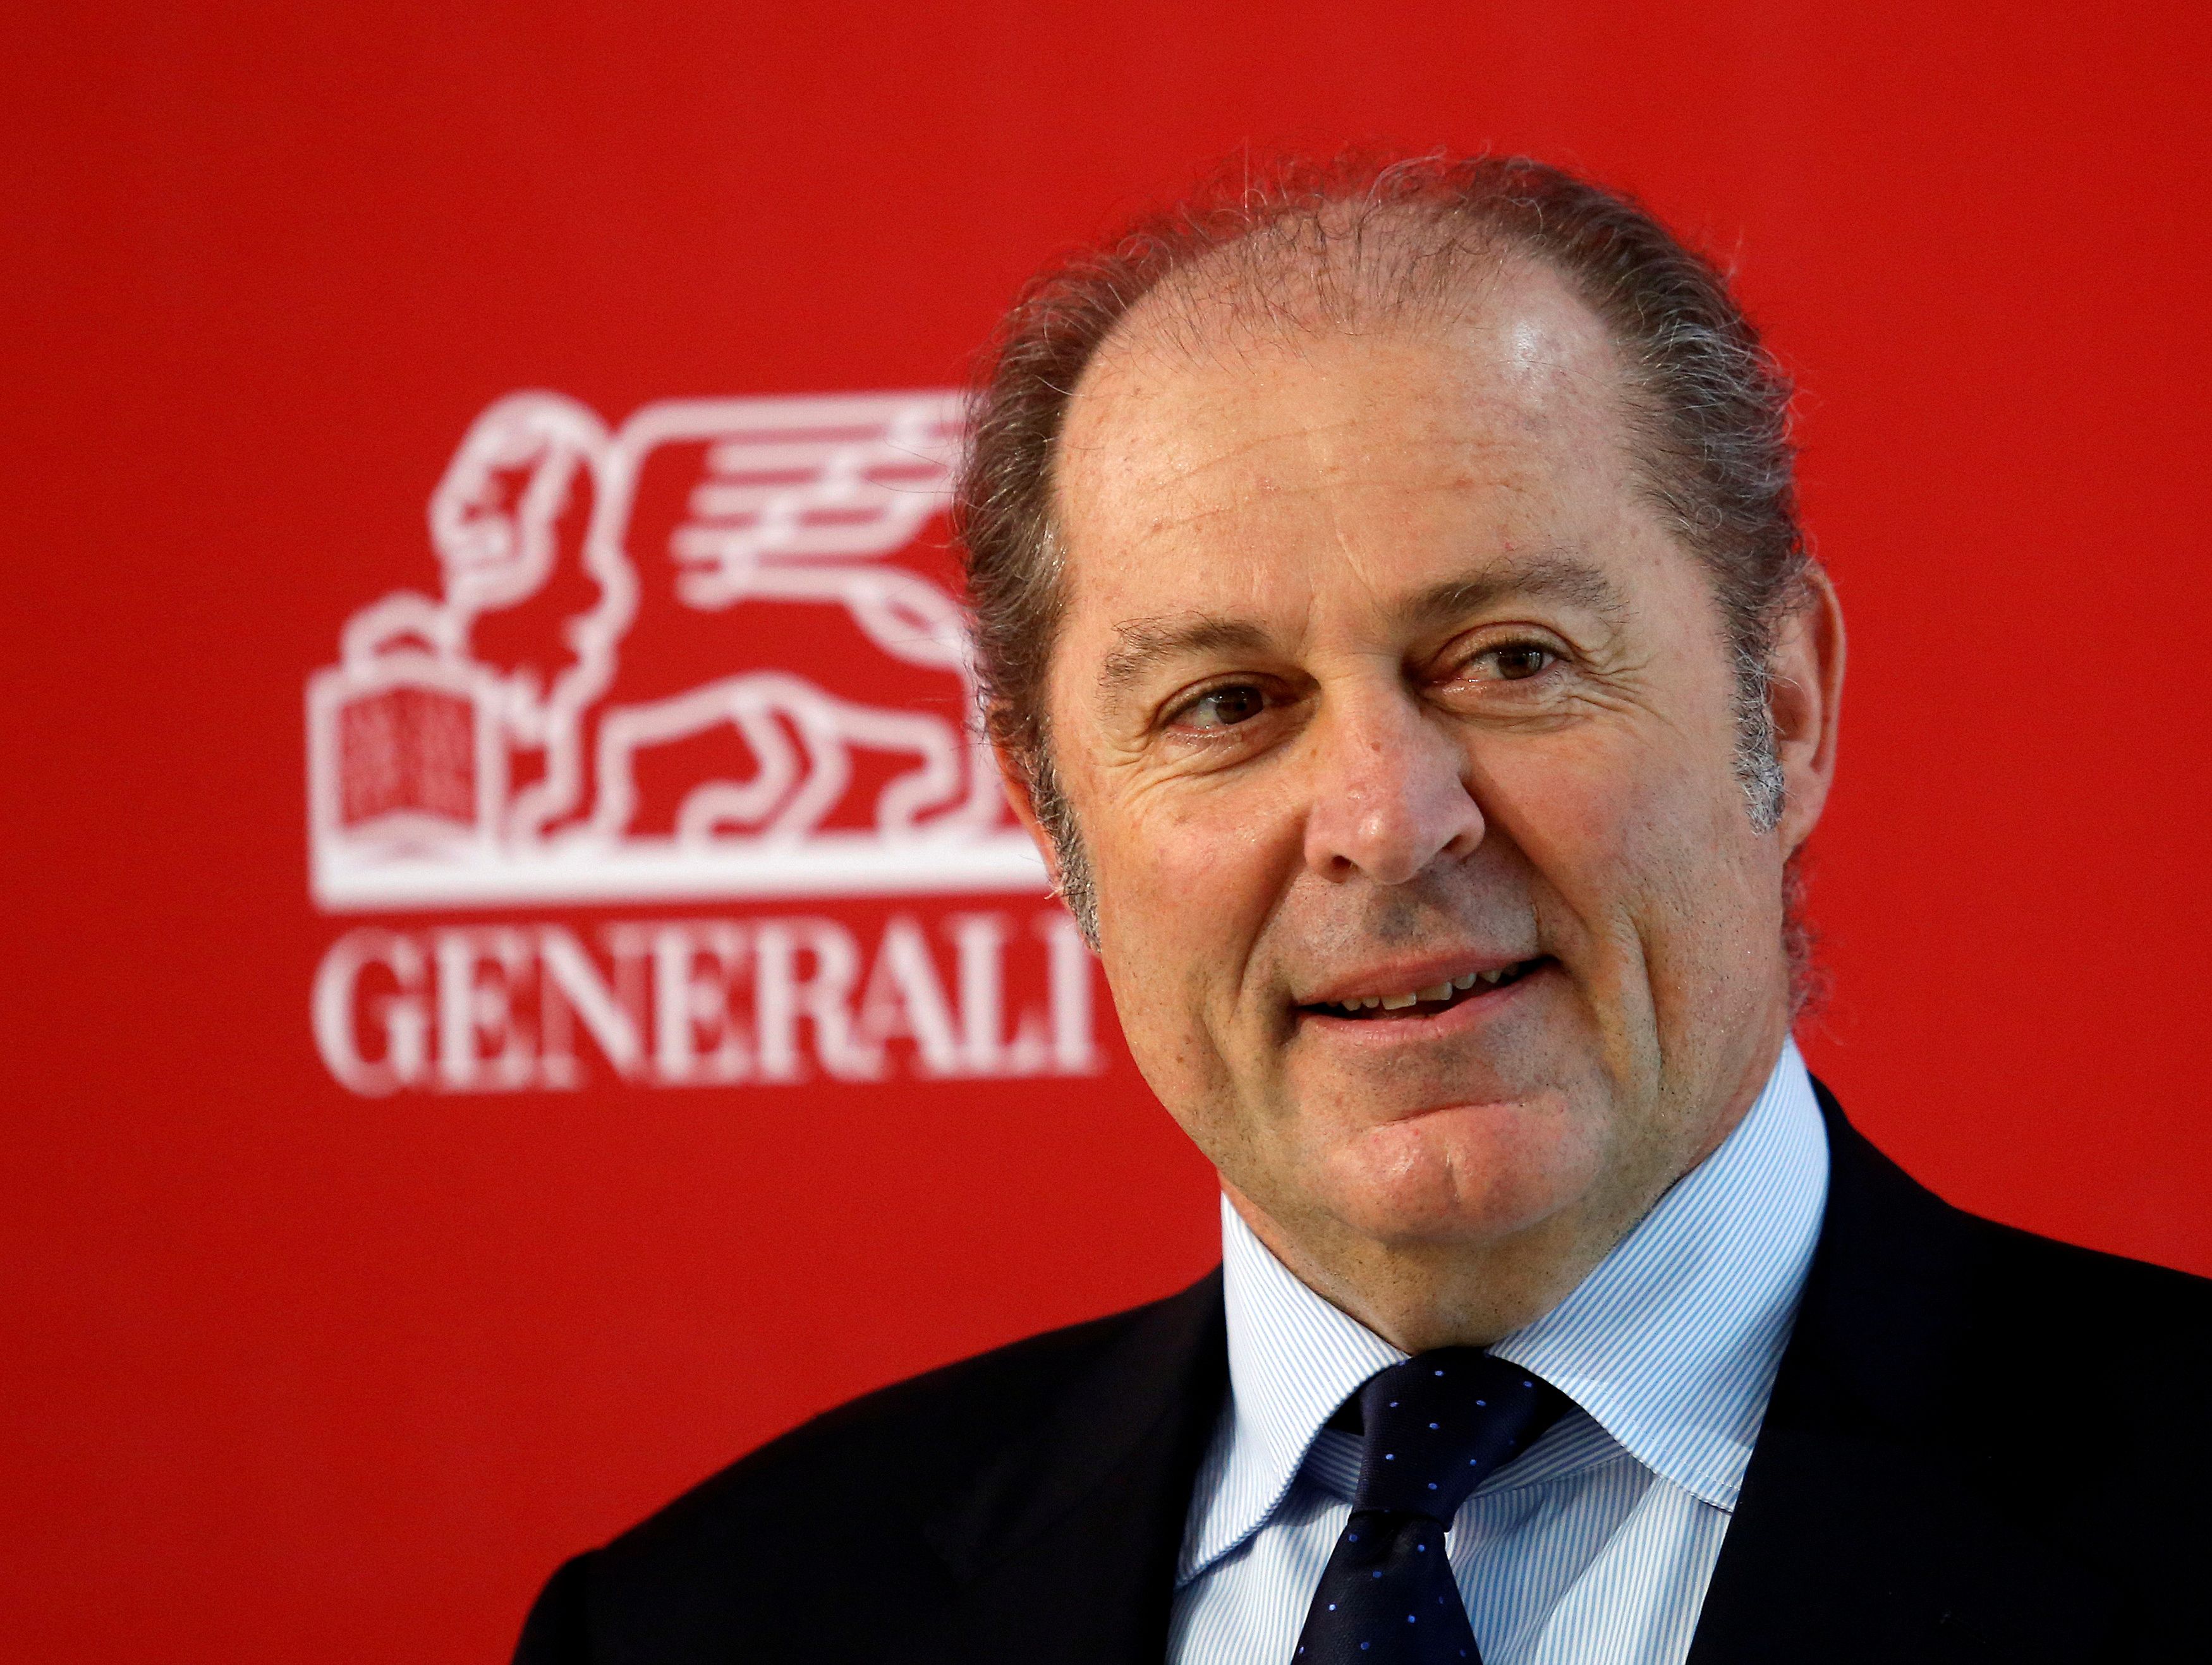 Philippe Donnet, CEO of the Italian insurance company Generali, is seen before shareholders meeting in Trieste